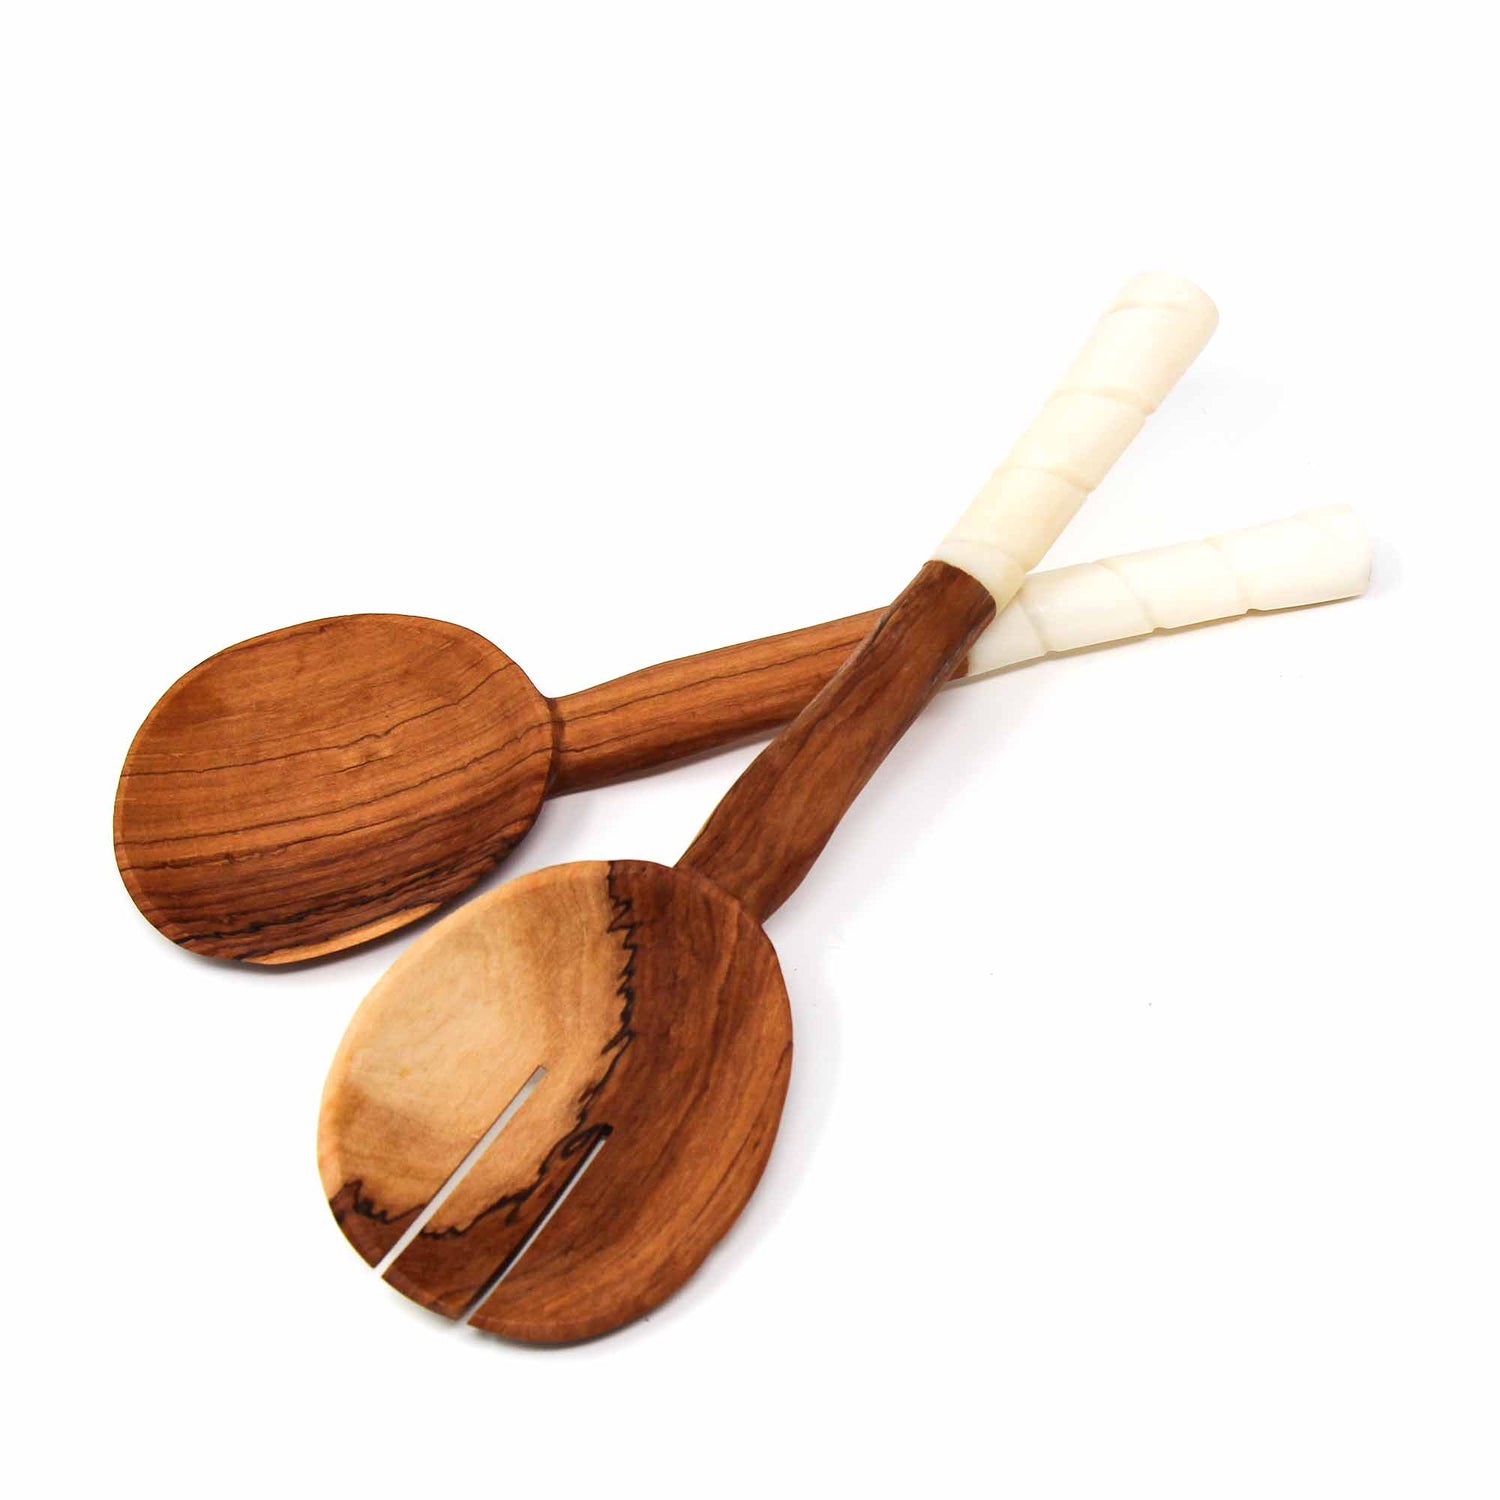 olive-wood-salad-servers-with-bone-handles-white-with-etching-design